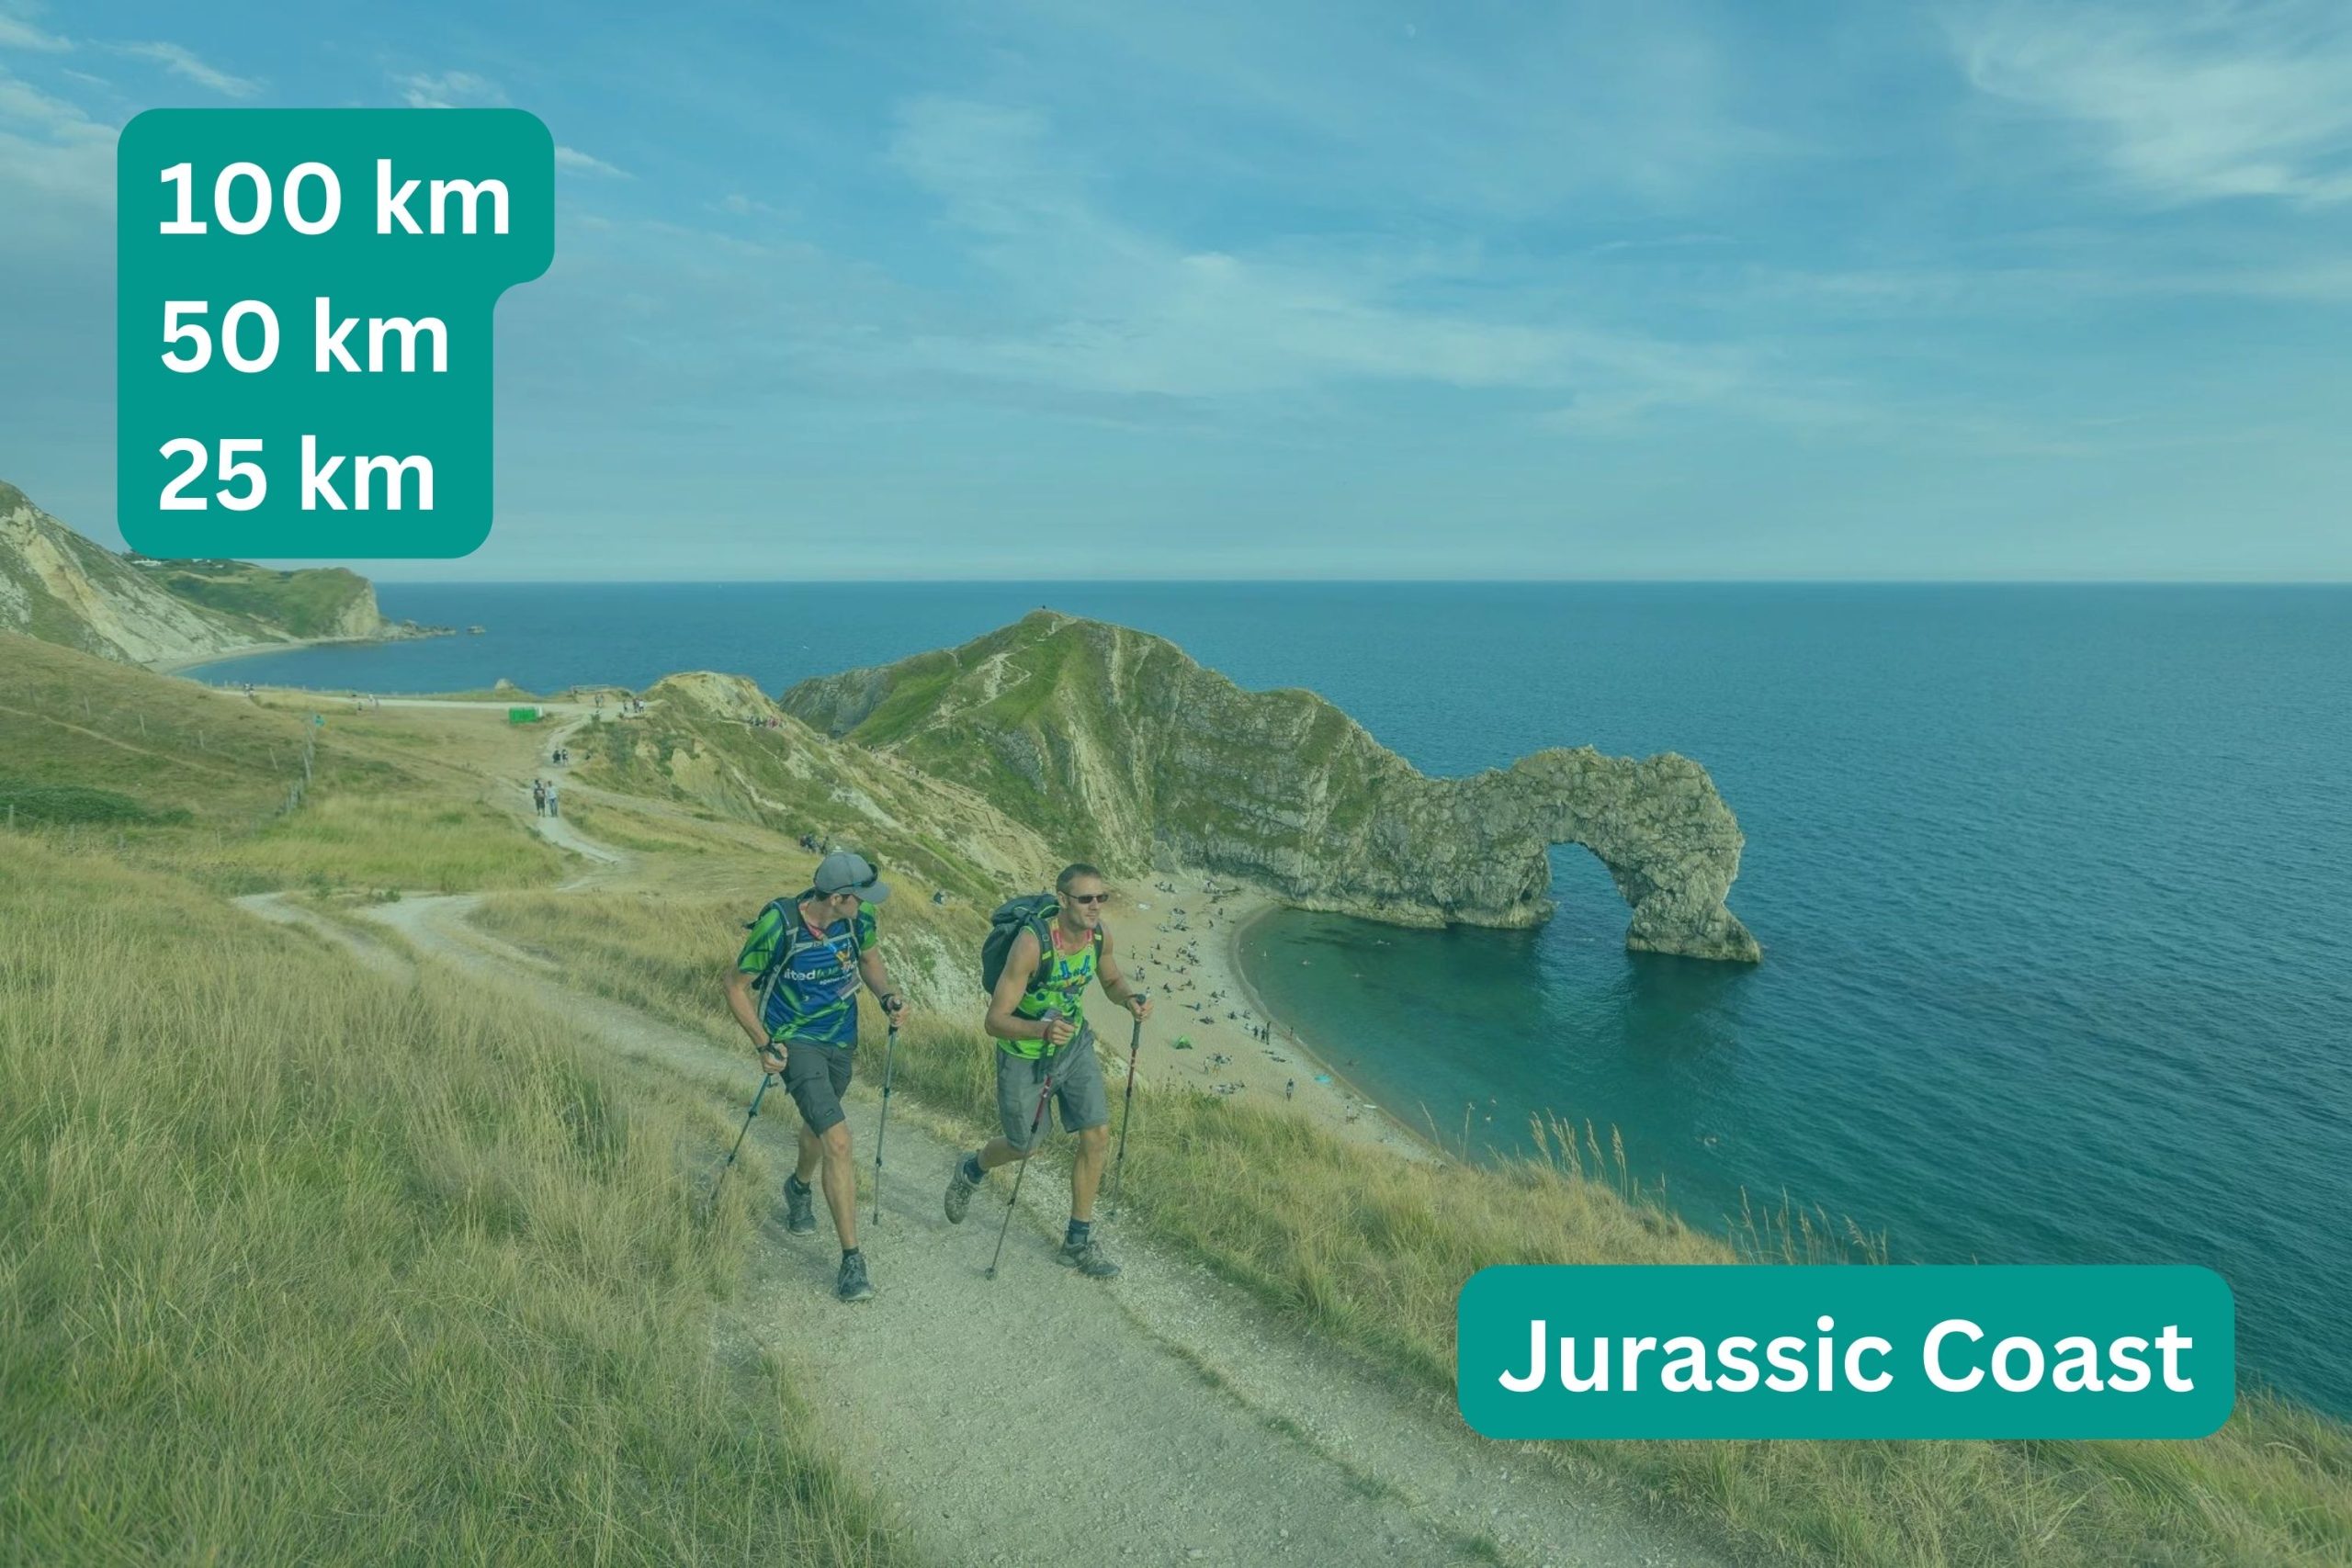 Two hikers walking along the Jurassic coast